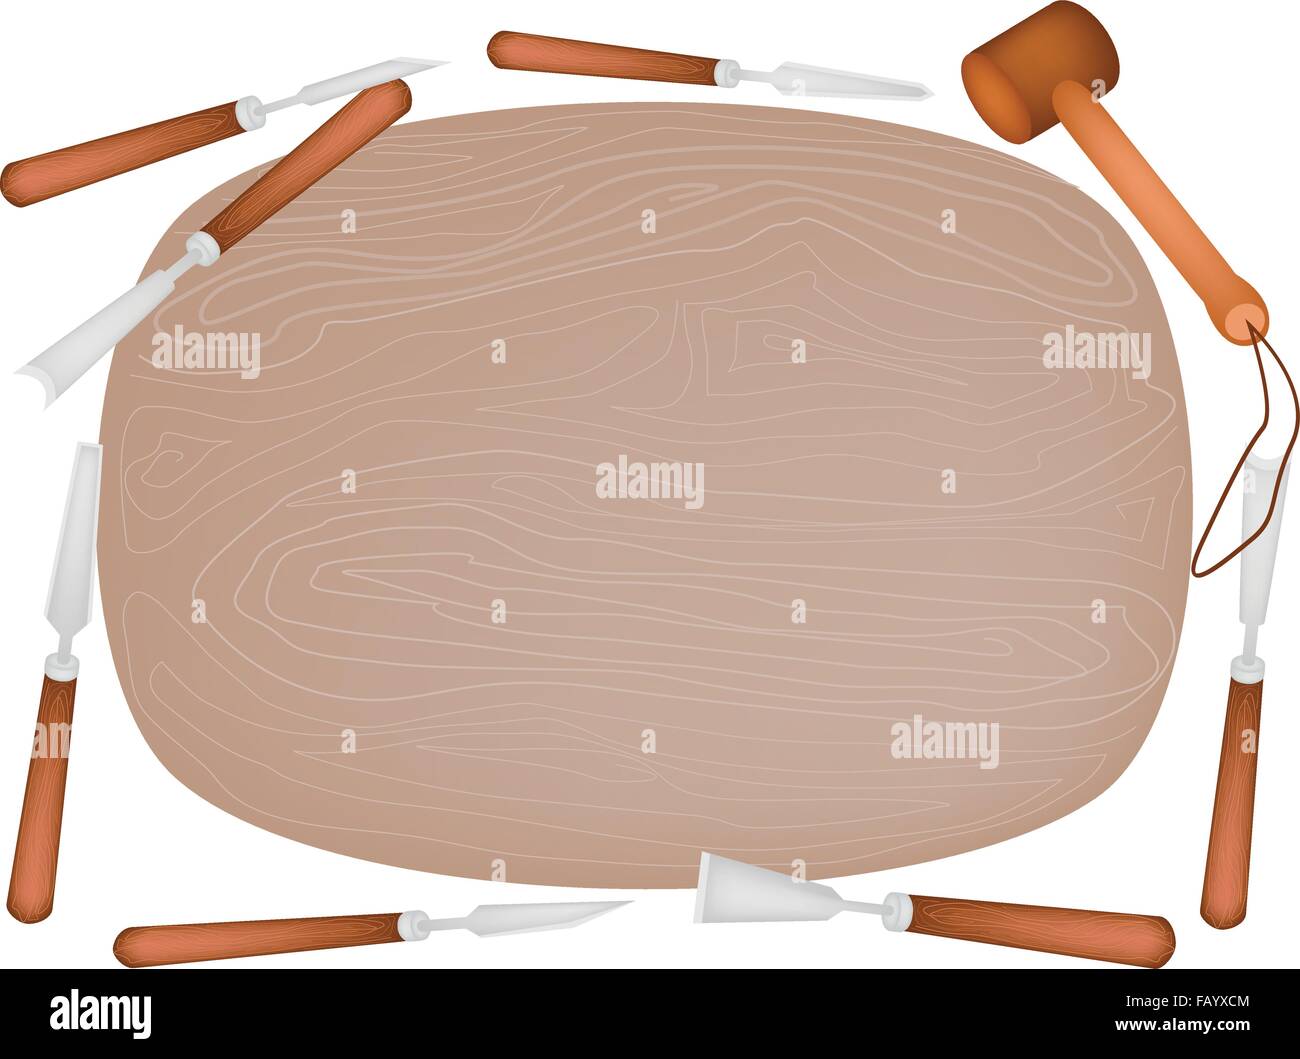 Carving Tools and A Wooden Mallet Laying Around A Piece of Wood For Create A Sculpture Isolated on White Background. Stock Vector